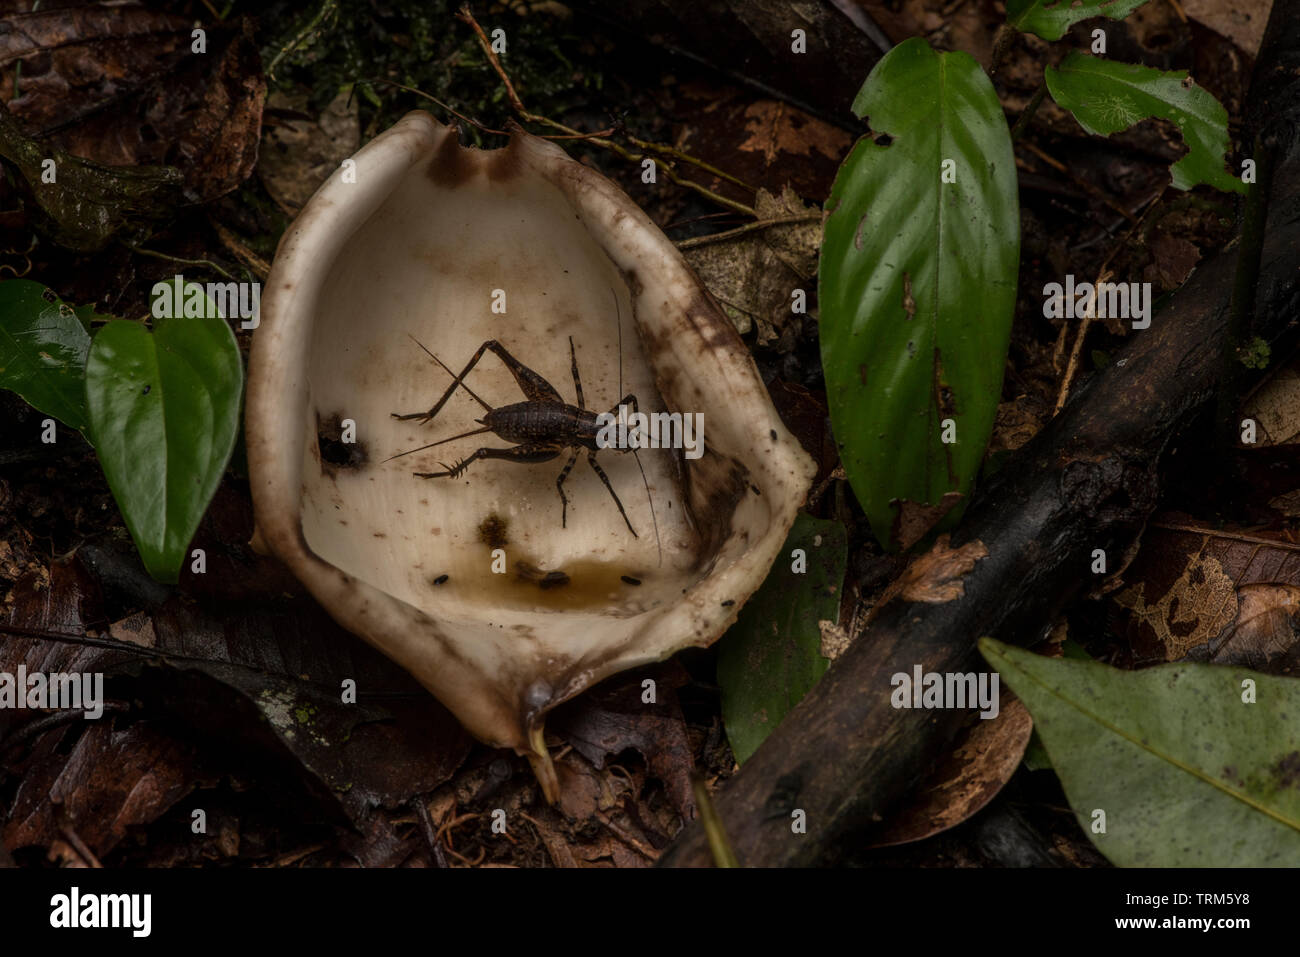 A cricket crawls across a fallen flower petal in the leaf litter on the forest floor in the Amazon rainforest in Yasuni national park, Ecuador Stock Photo